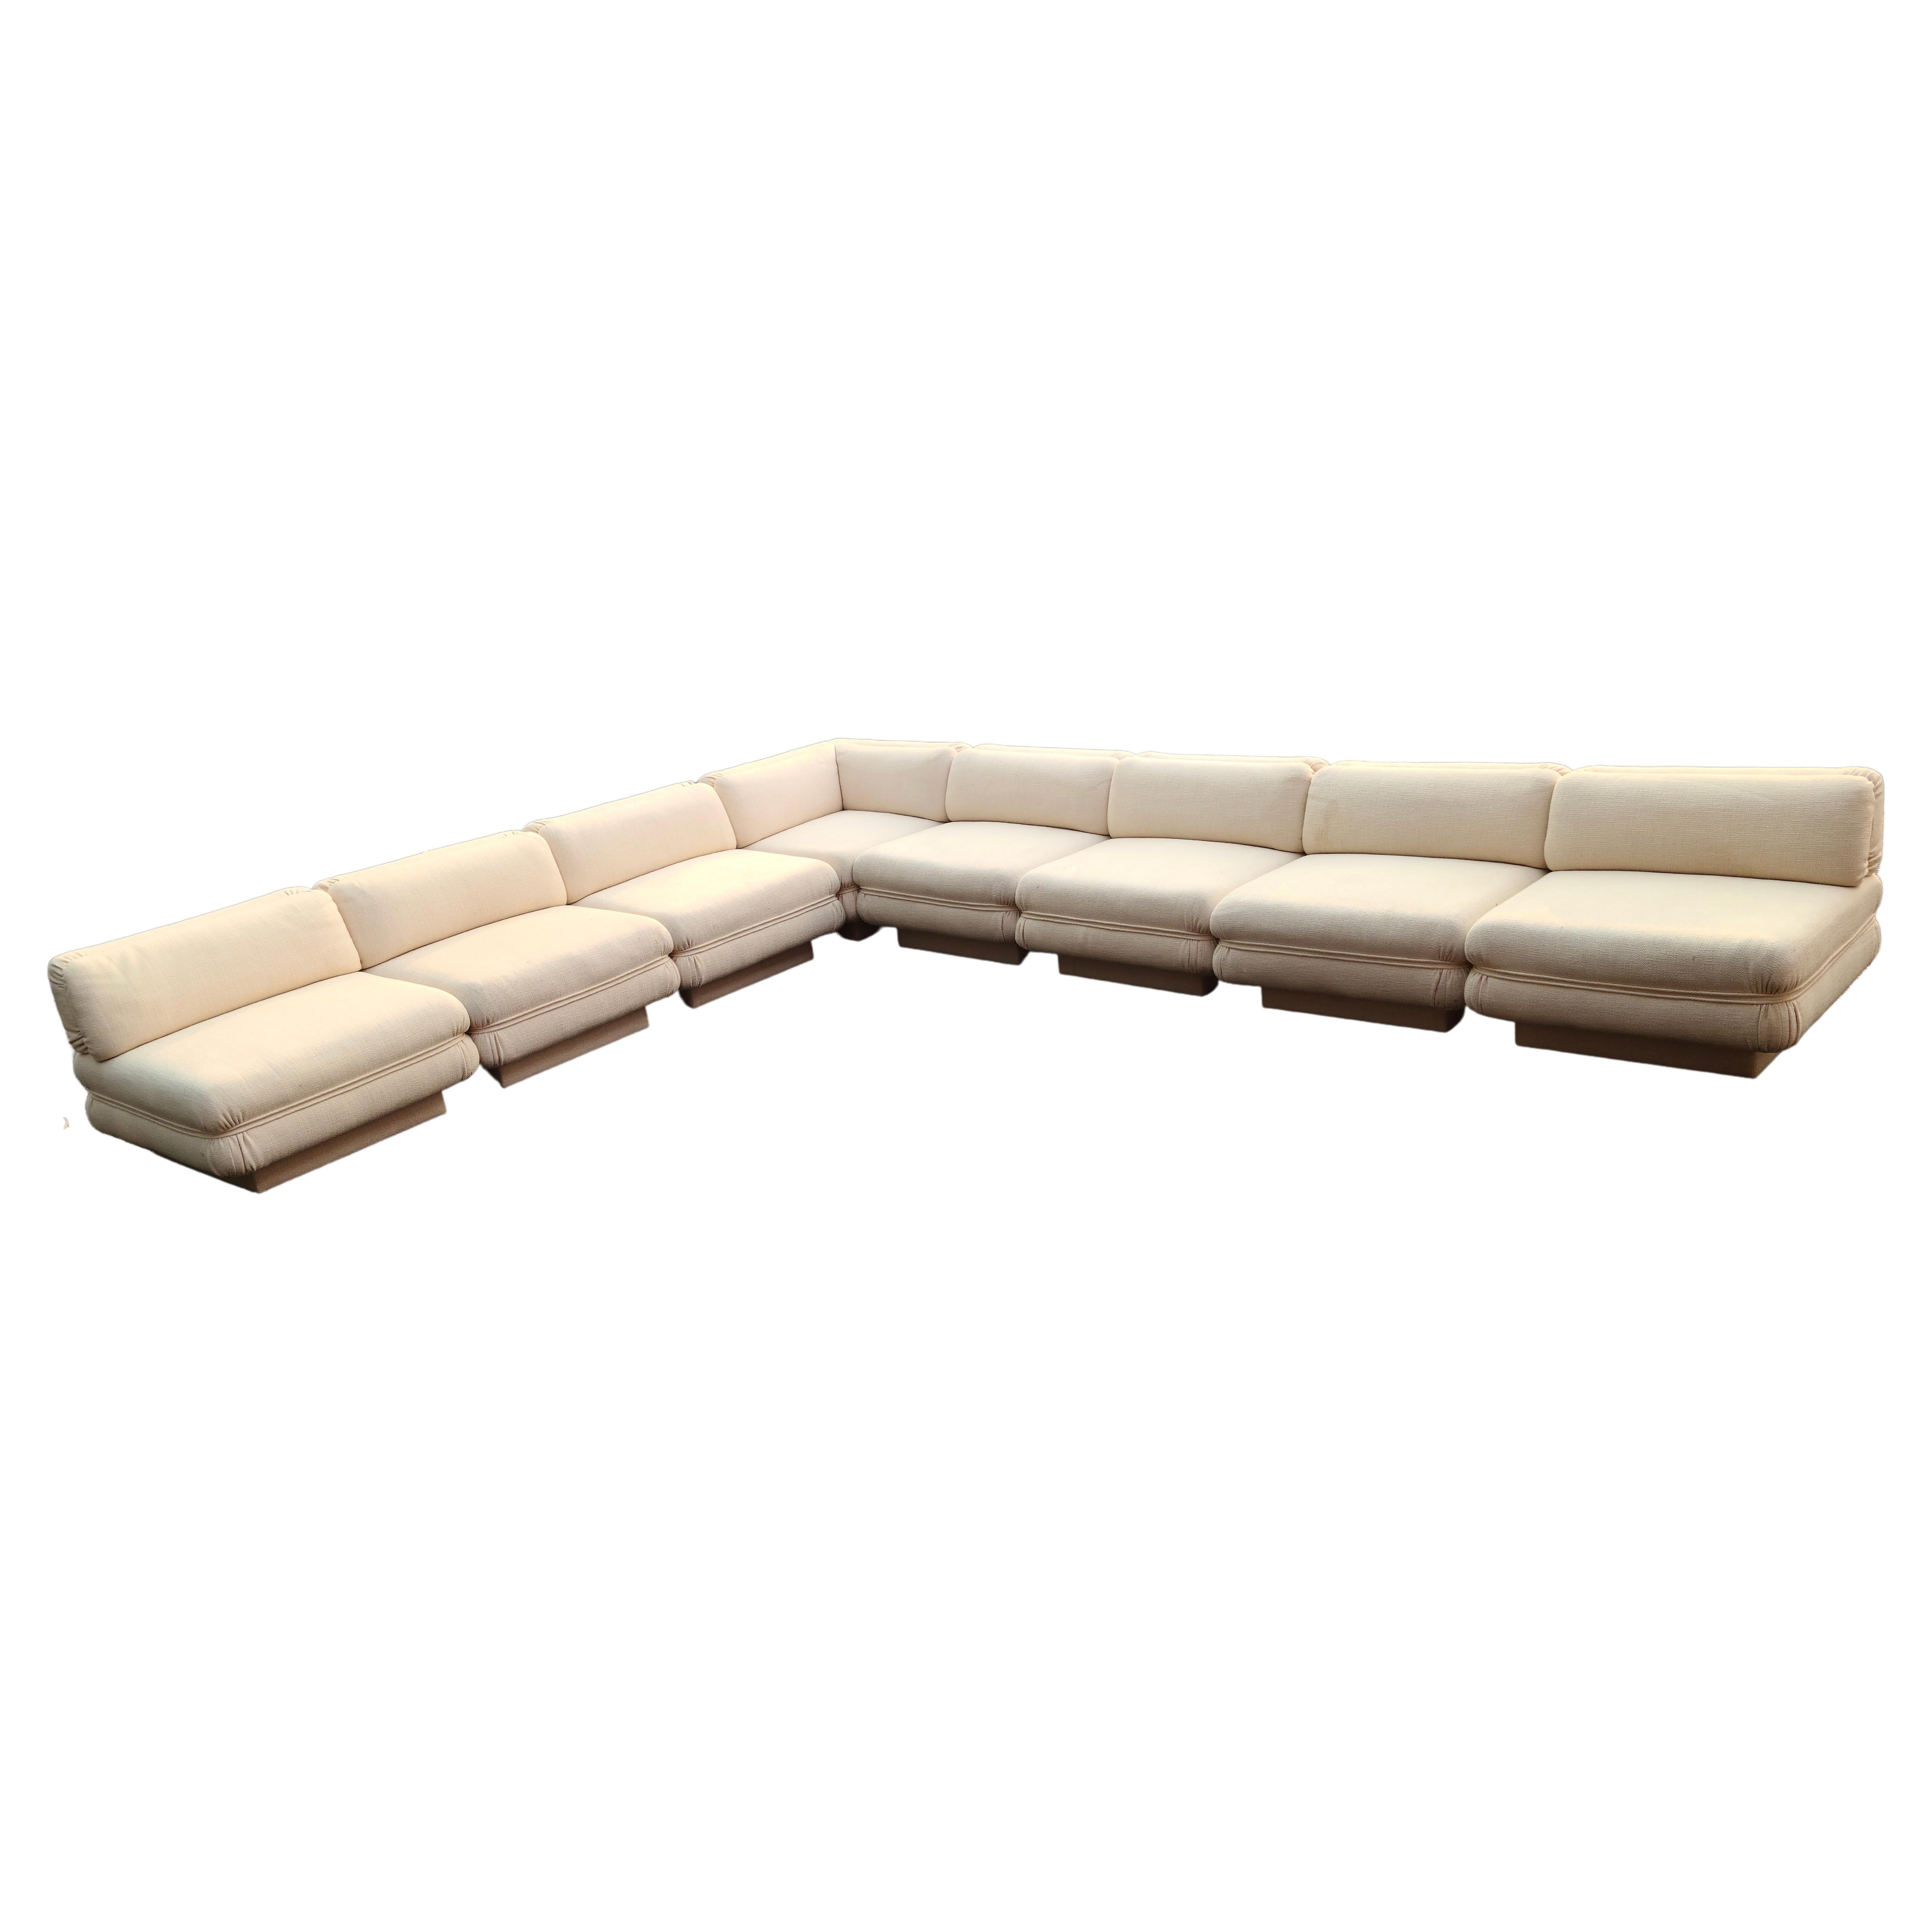 Harvey Probber 8 Piece Sectional Sofa For Sale 6